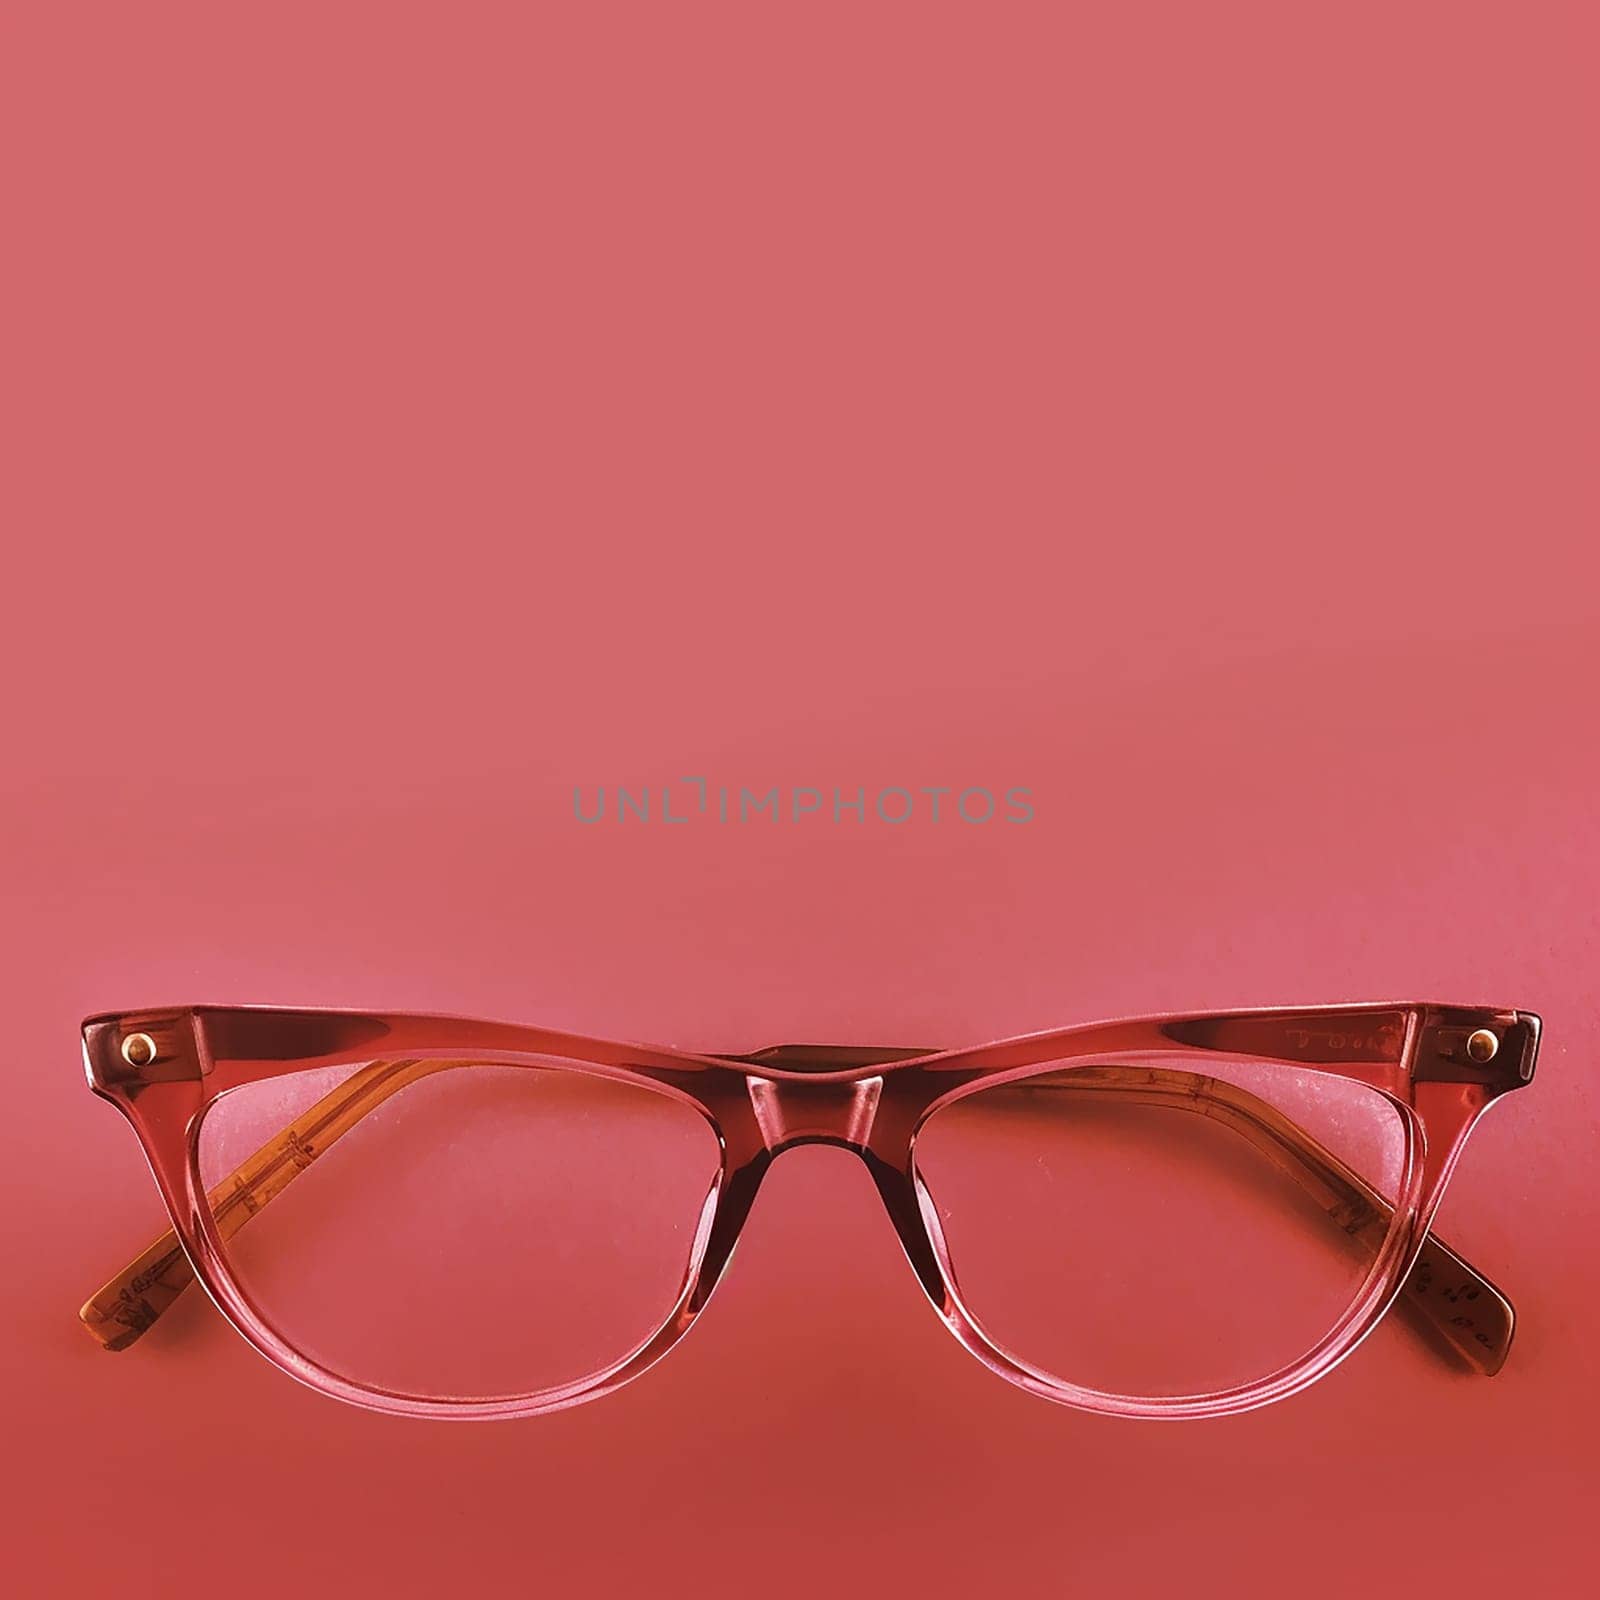 Transparent pink glasses on a plain red background.